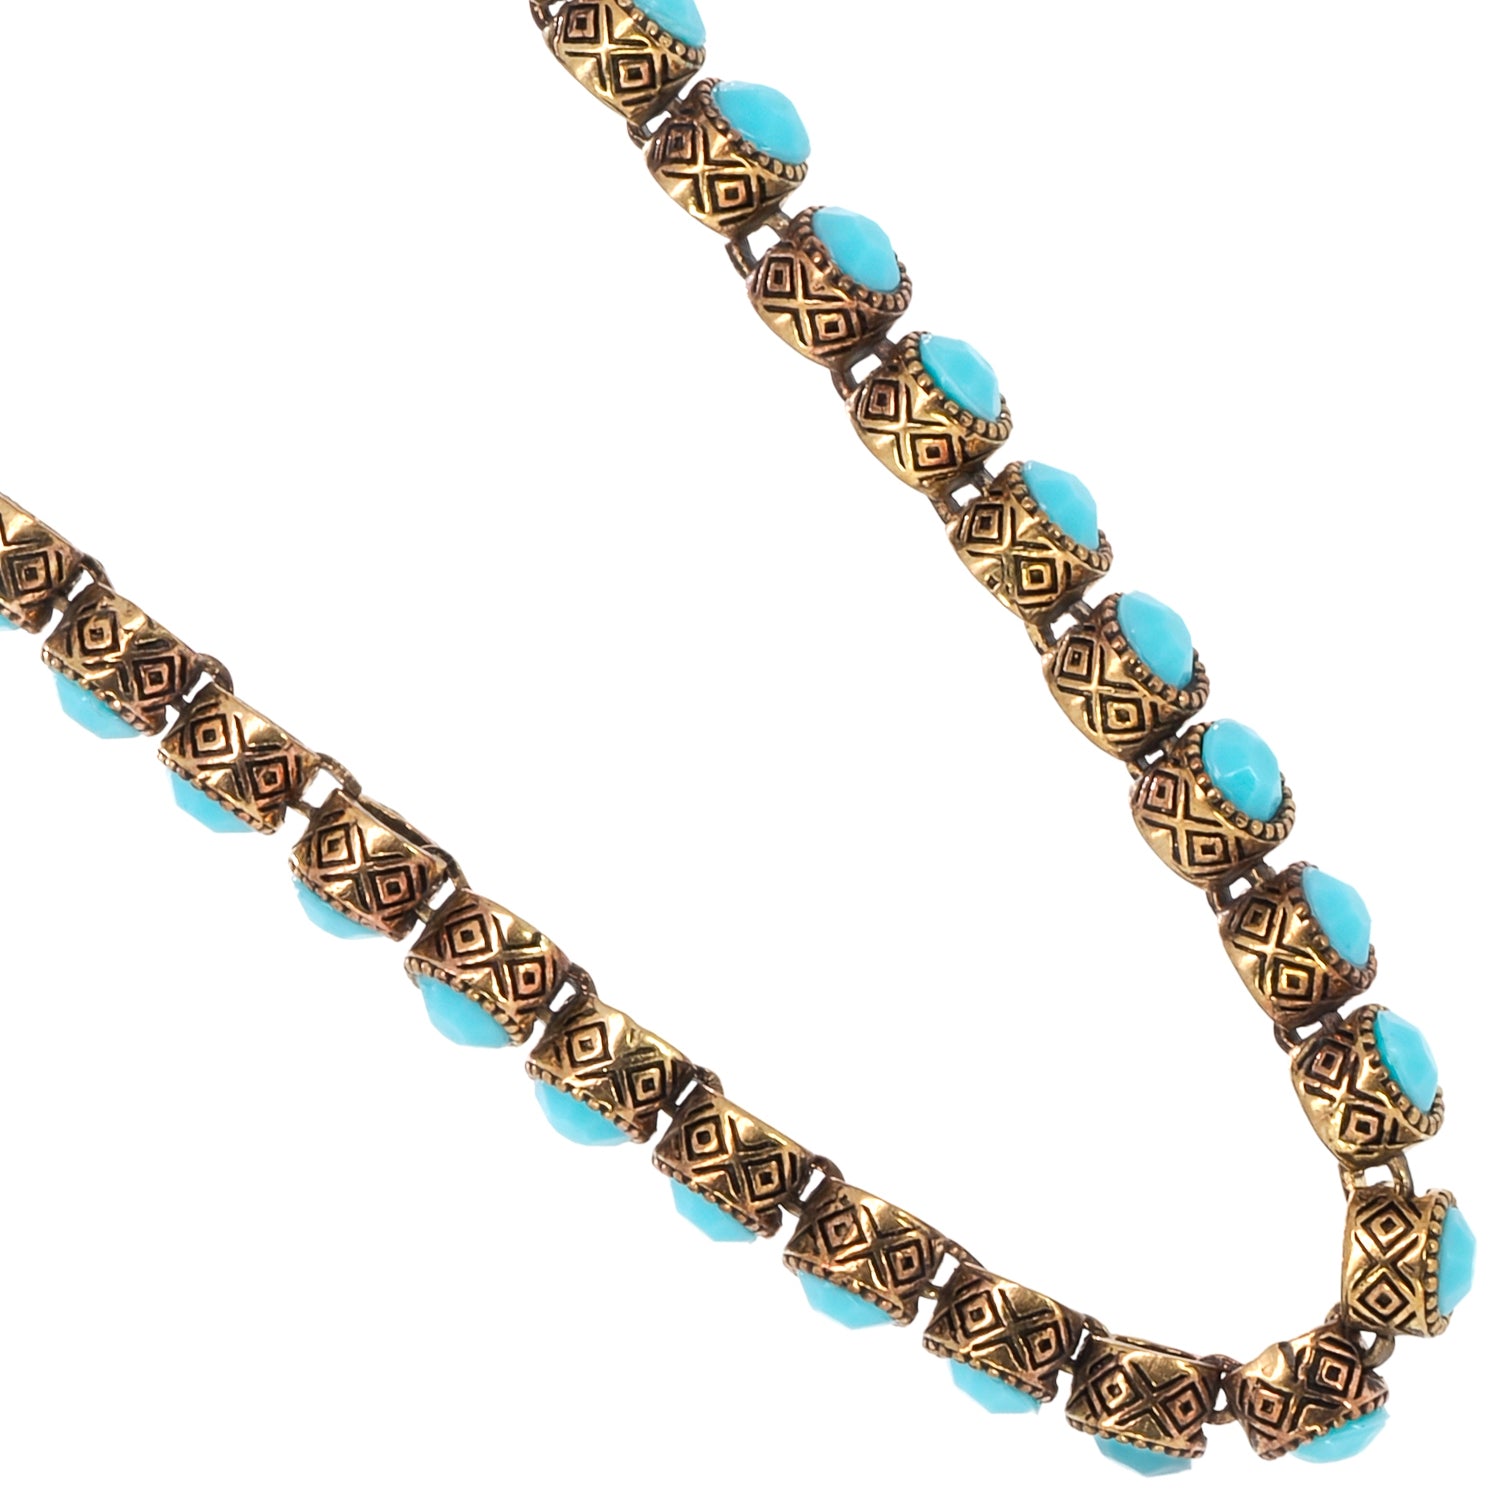 Make a fashion statement with this stylish and energetic turquoise tennis necklace, meticulously handcrafted for a personalized touch.